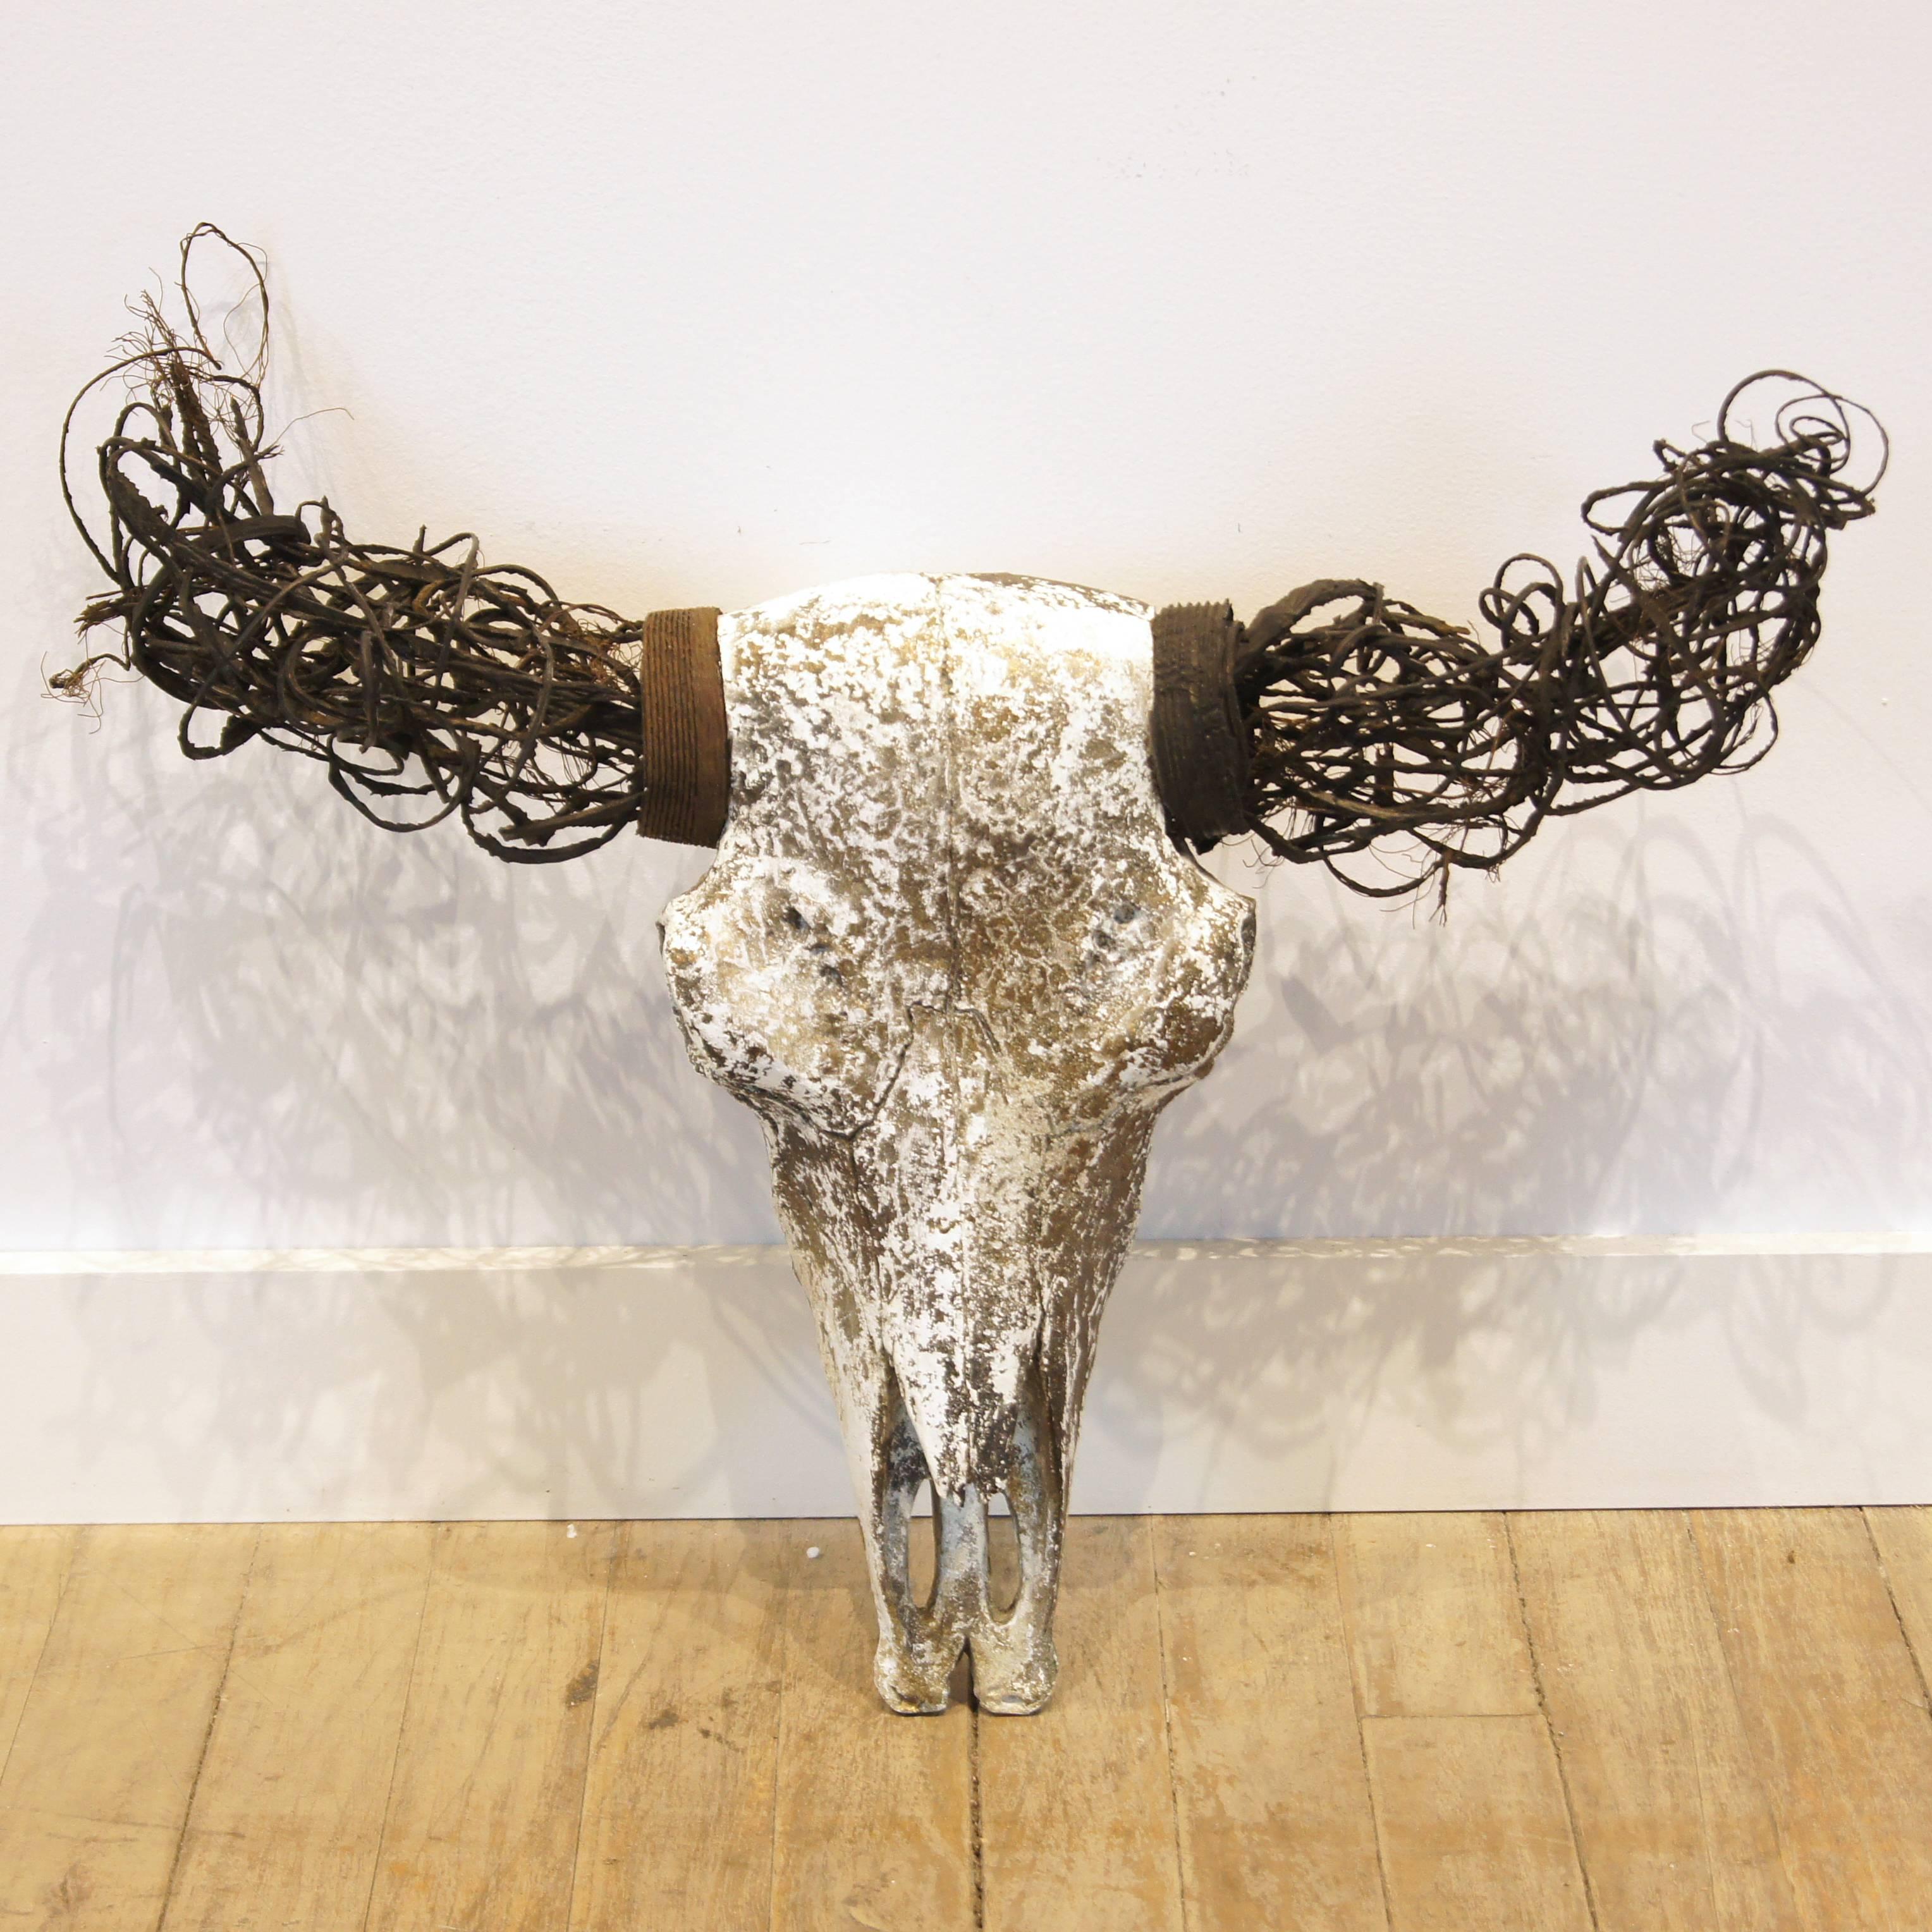 Faux Bison Skull in Resin with Found Object Horns and Painted Texture - Sculpture by Banyan Fierer